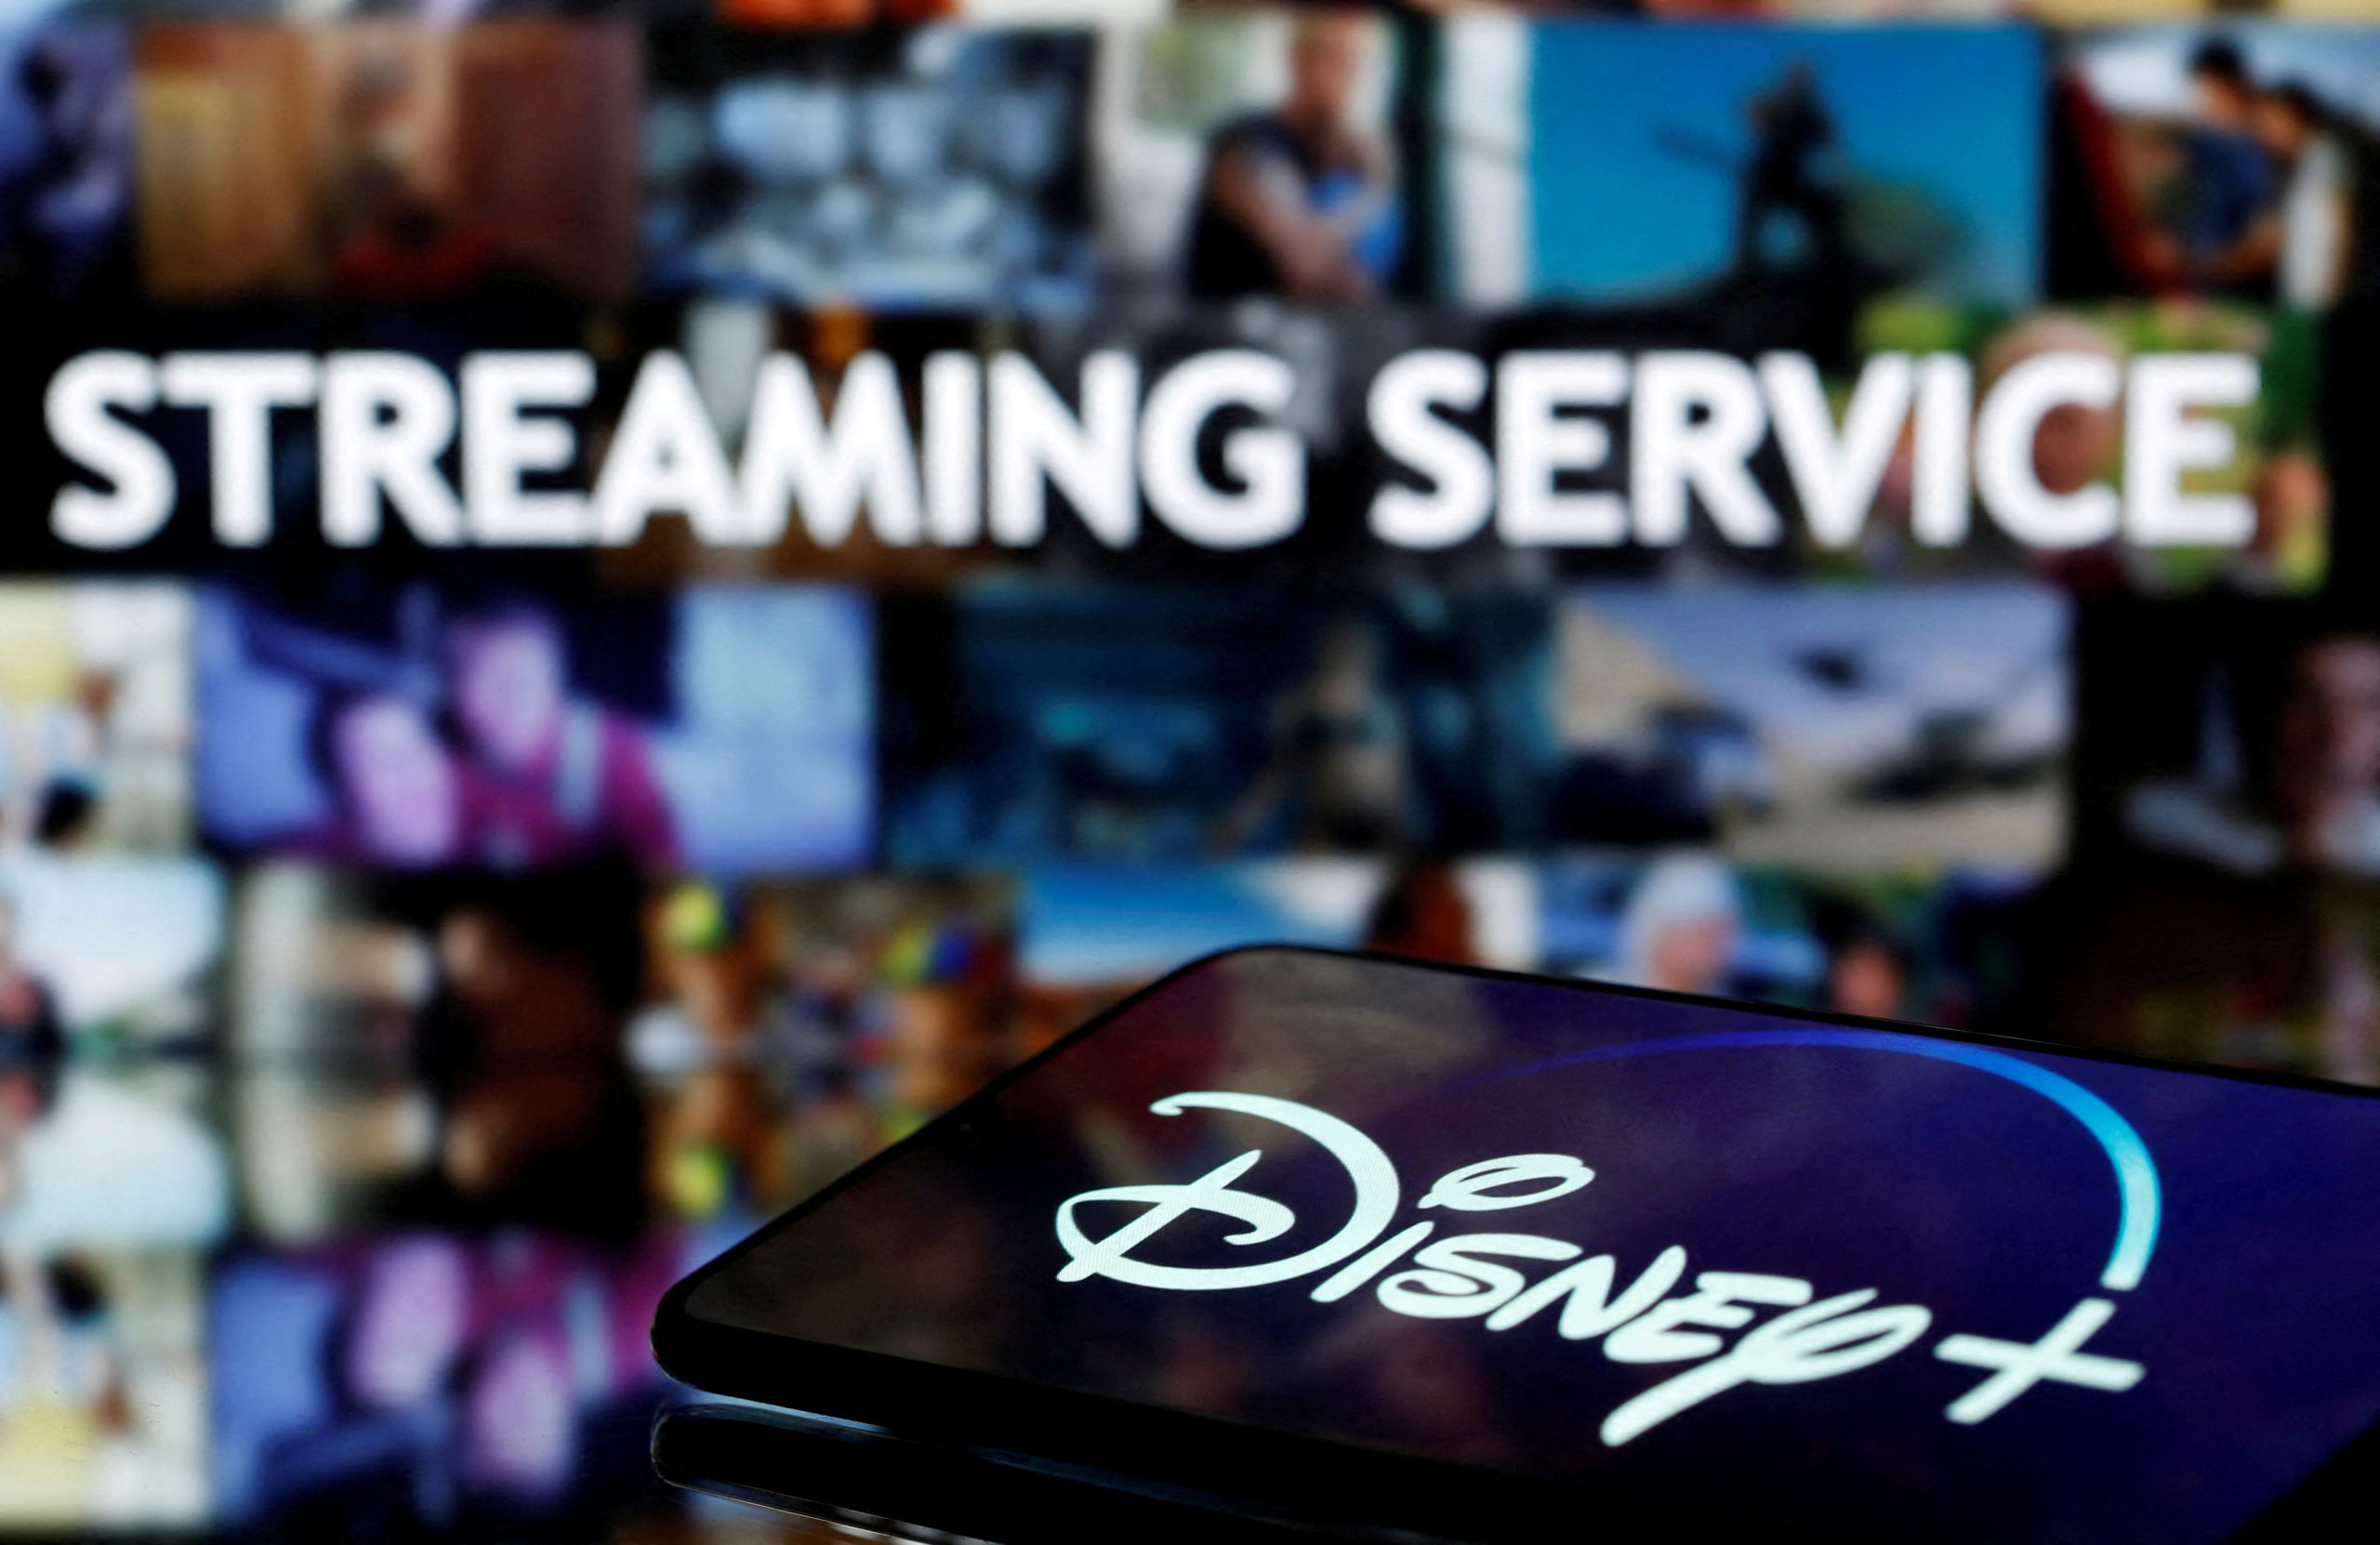 A smartphone screen showing the "Disney+" logo is seen in front of the words "streaming service" in this illustration taken March 24, 2020. REUTERS/Dado Ruvic